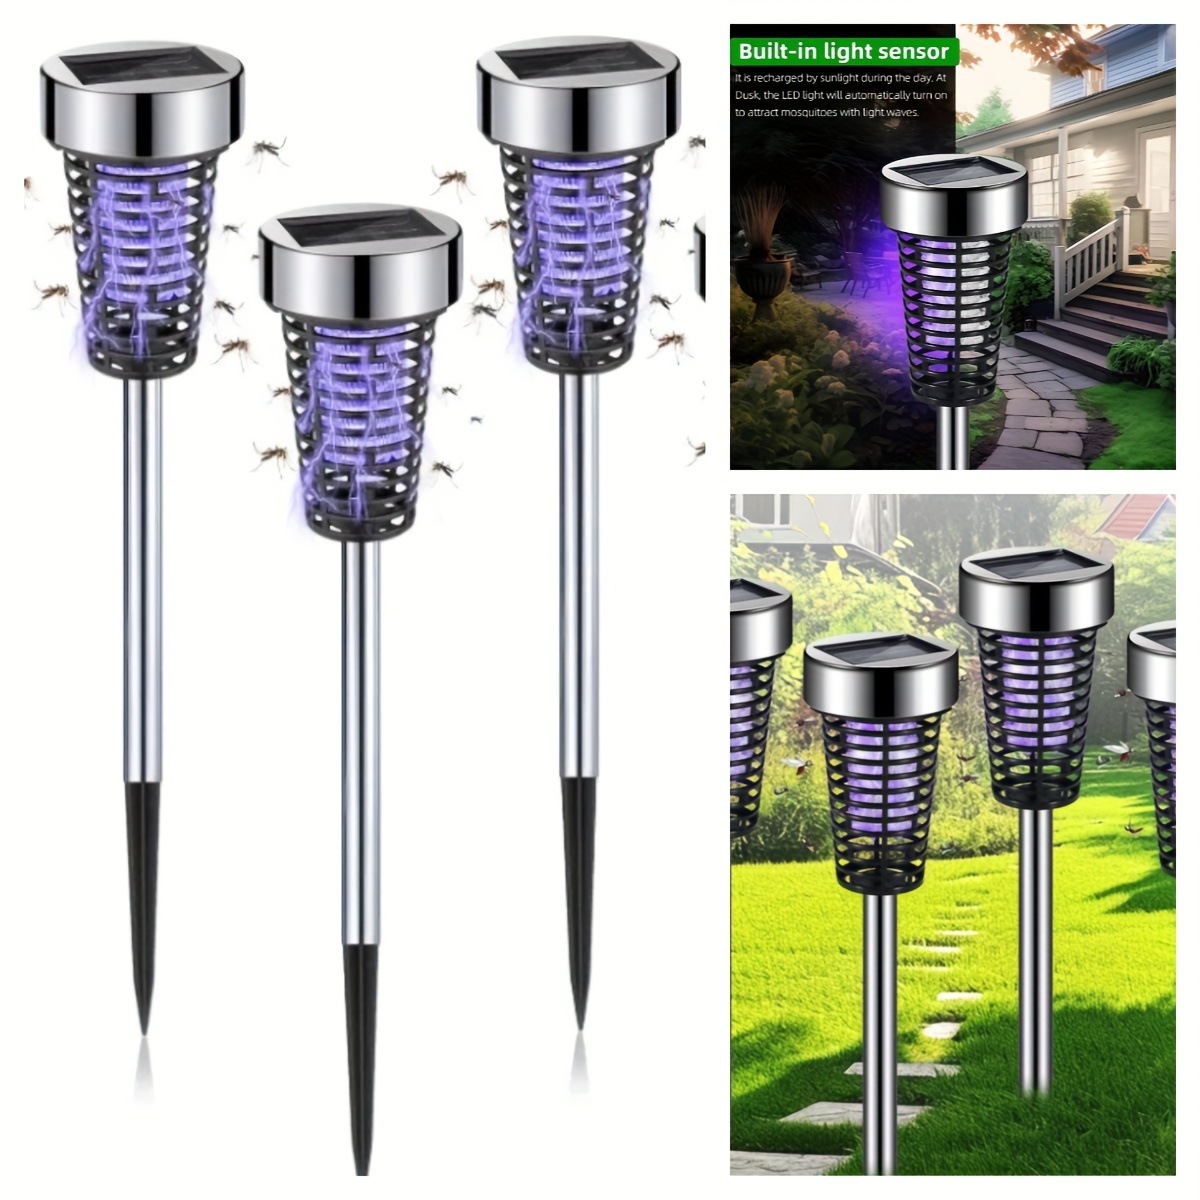 

2-piece Solar-powered Bug Zappers - Rechargeable, Outdoor Led/uv Mosquito & Fly Killer Lights With Easy Installation Perfect For Summer Evenings - Keep Bug-free!